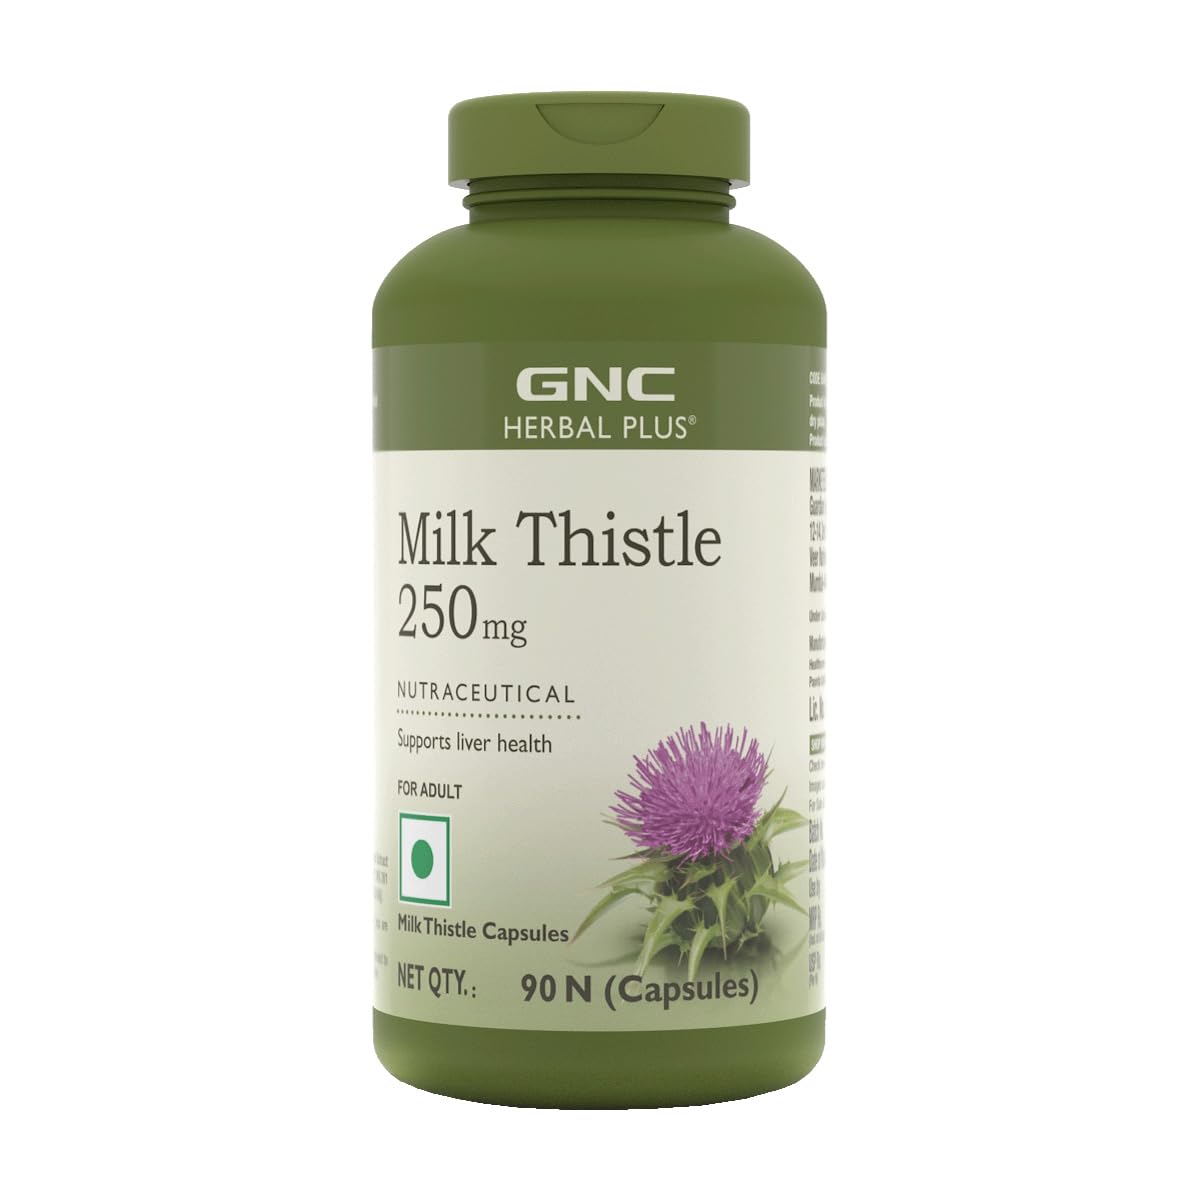 GNC Herbal Plus Milk Thistle -90 Capsules , Protects Liver Health 